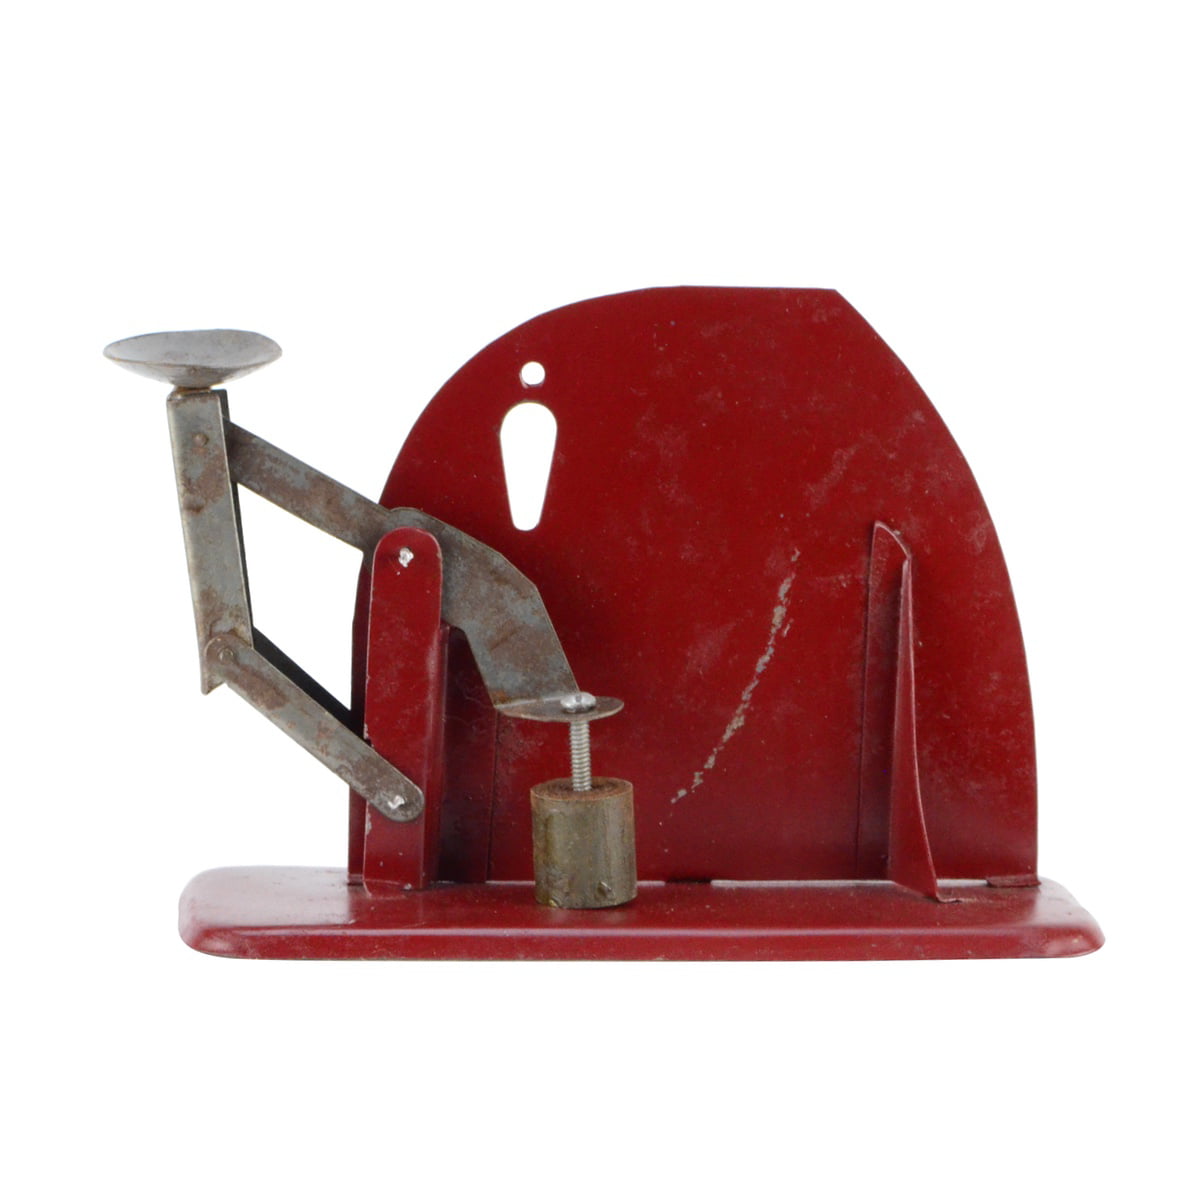 Sold at Auction: Jiffy-Way Advertising Egg Scale